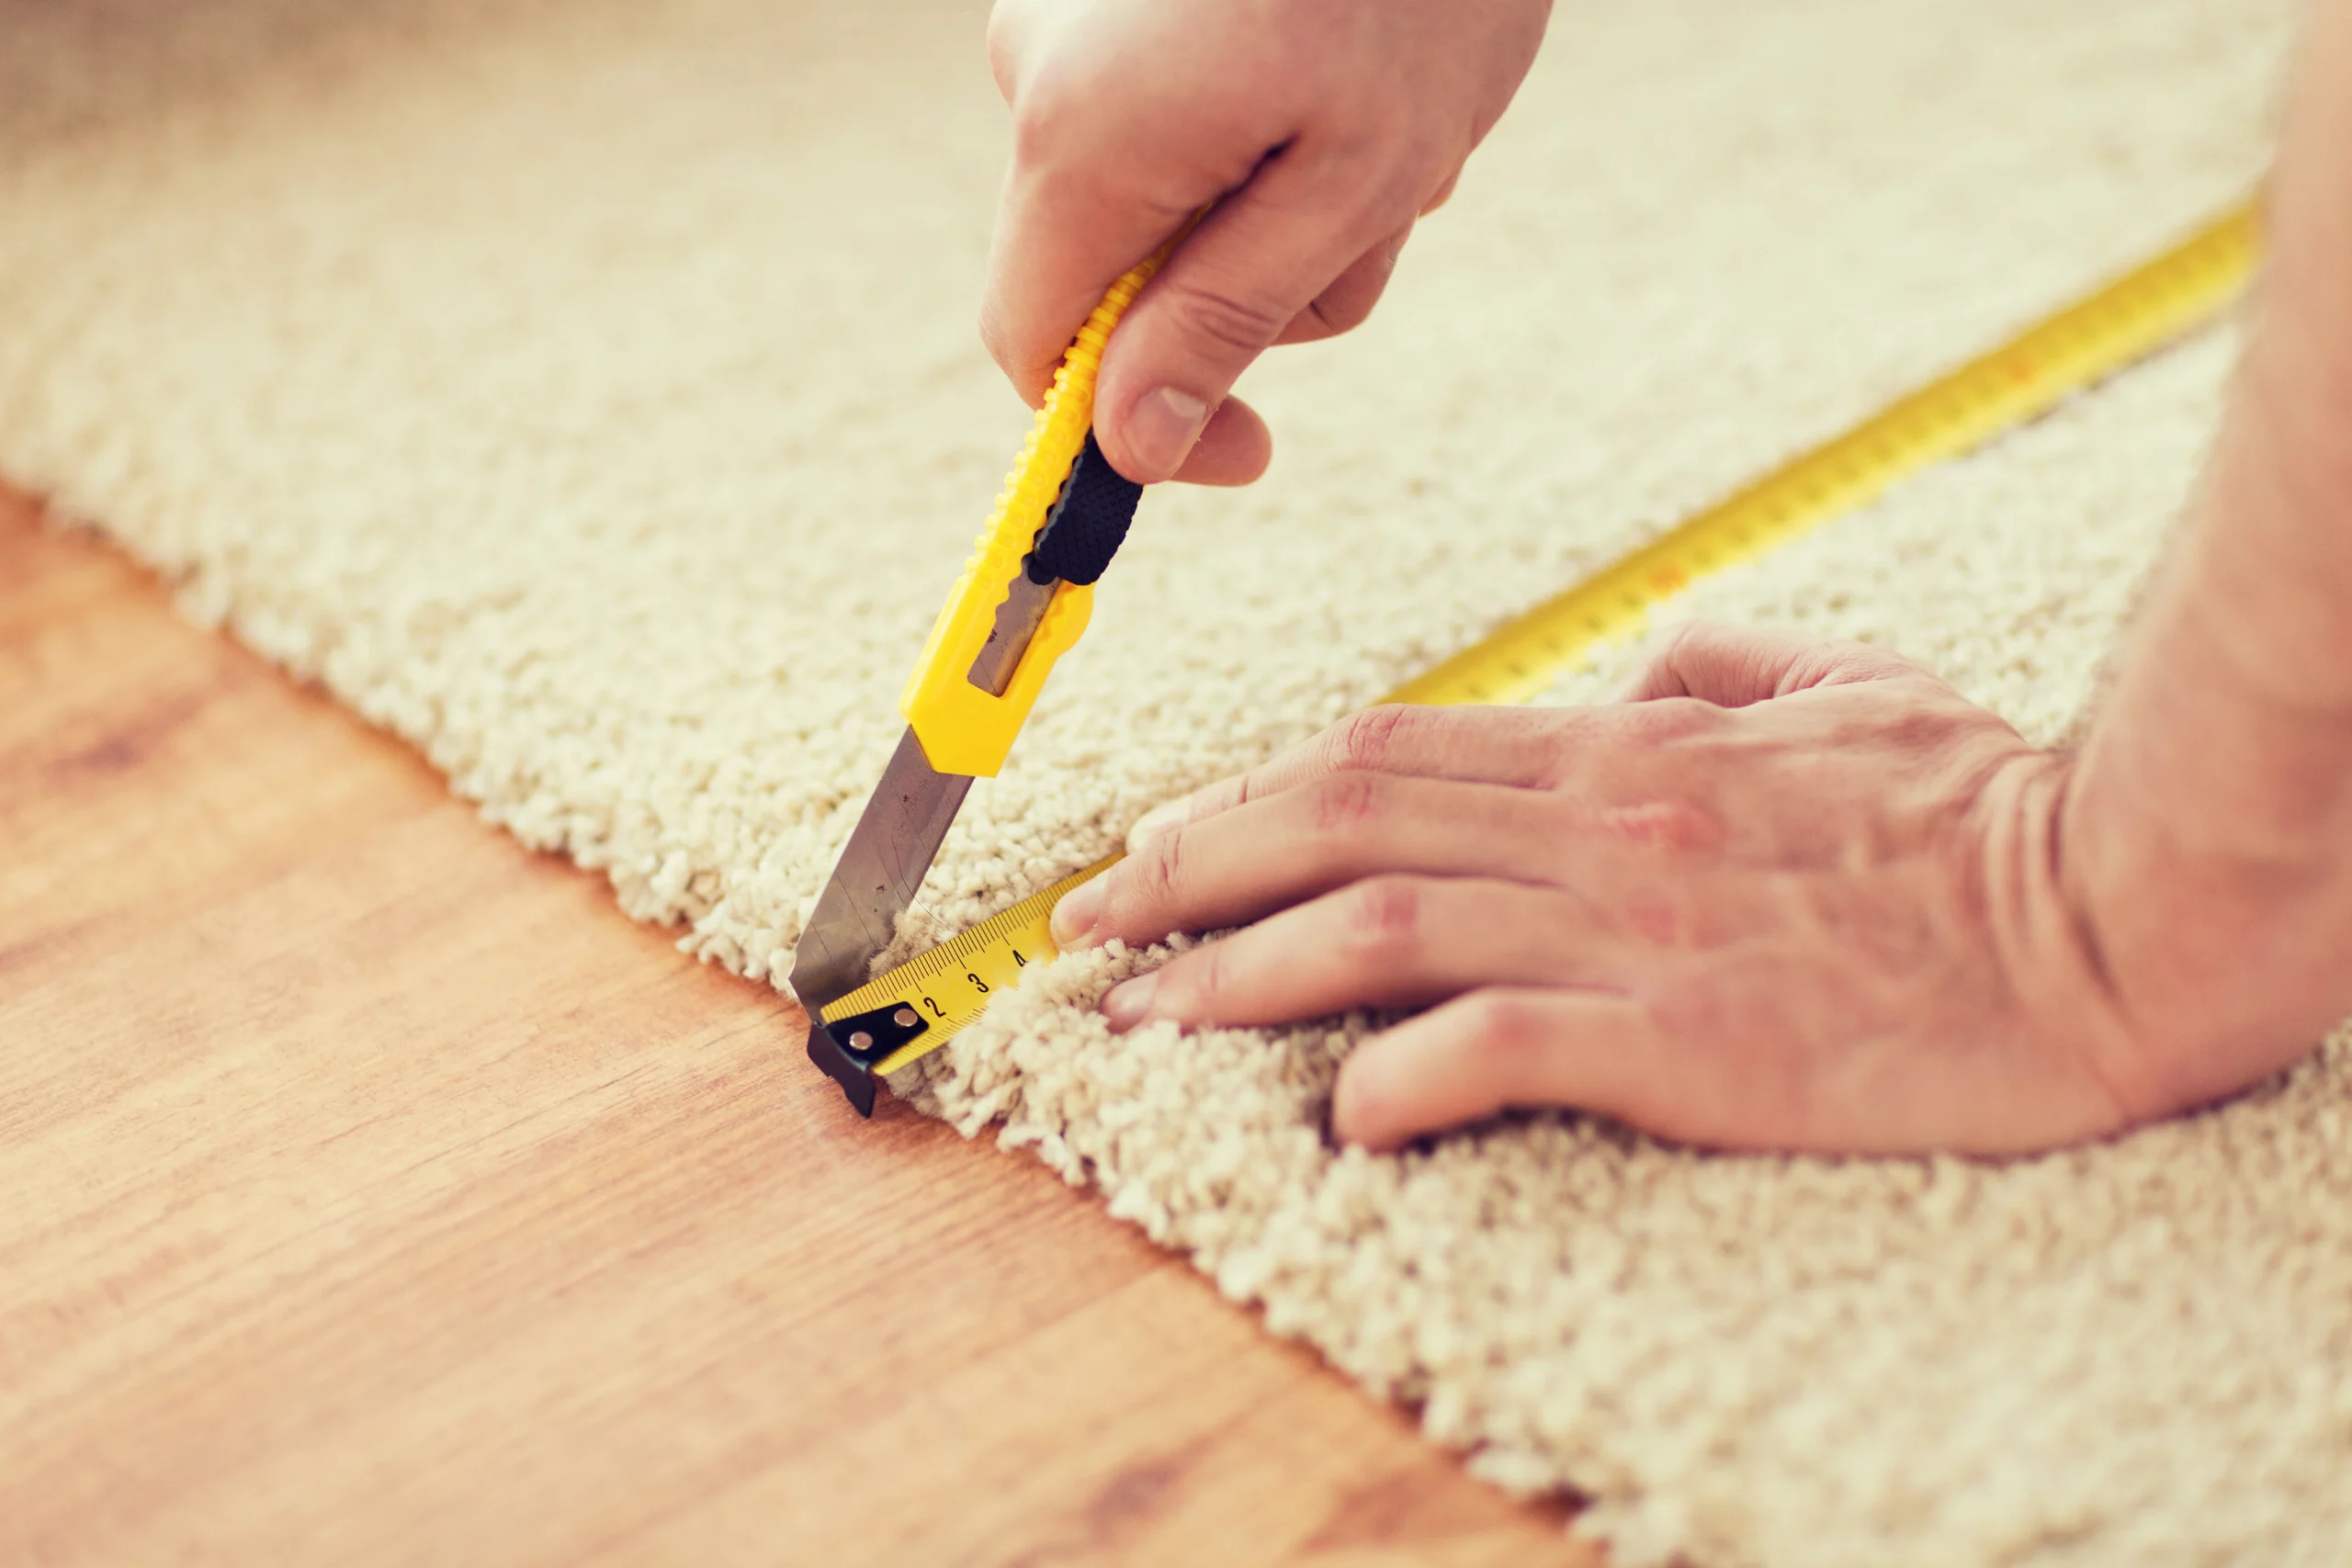 How to Cut Carpet for Disposal: A Step-by-Step Guide